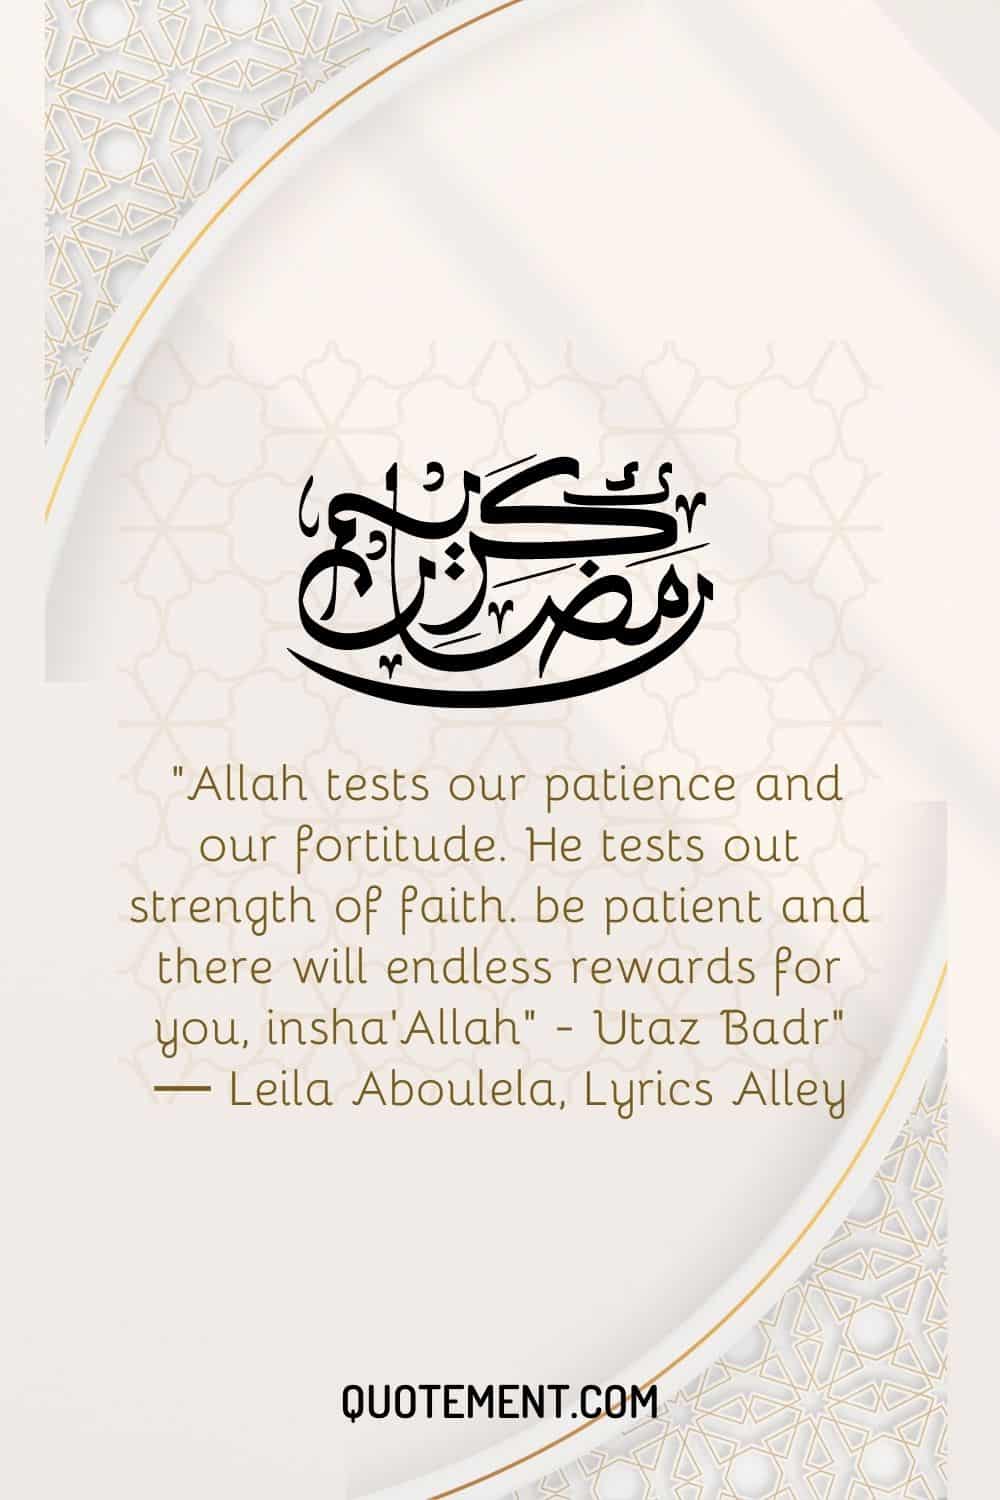 Allah tests our patience and our fortitude